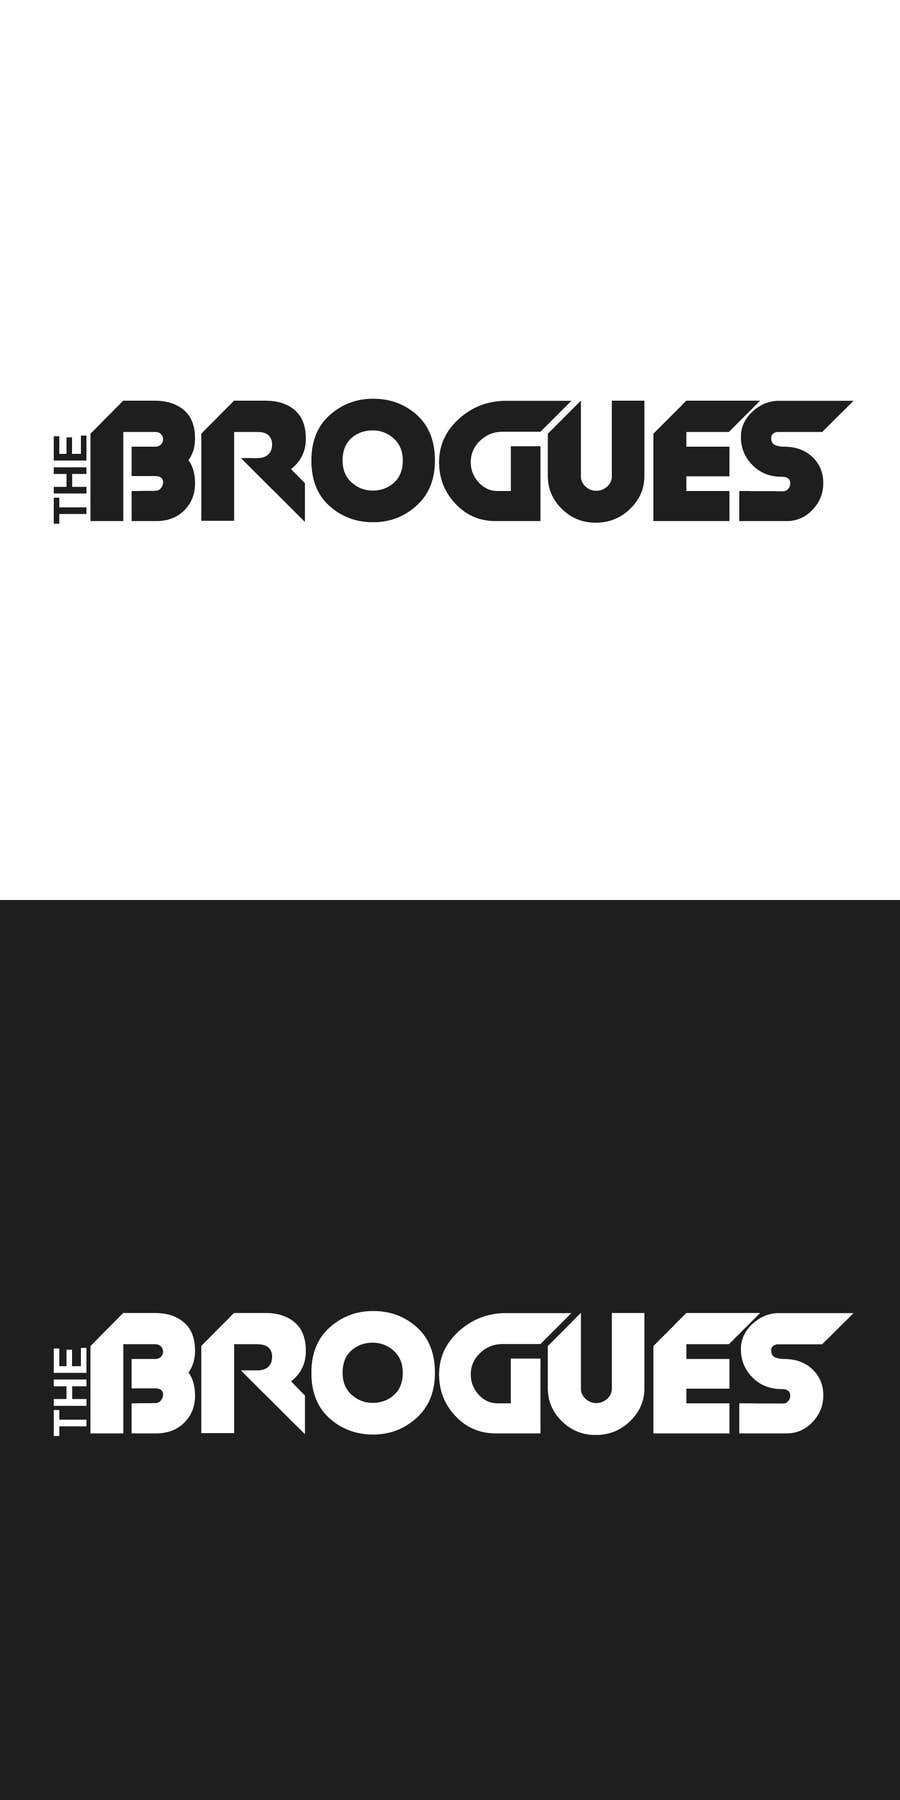 Contest Entry #18 for                                                 Design a Logo for a band 'brogues'
                                            